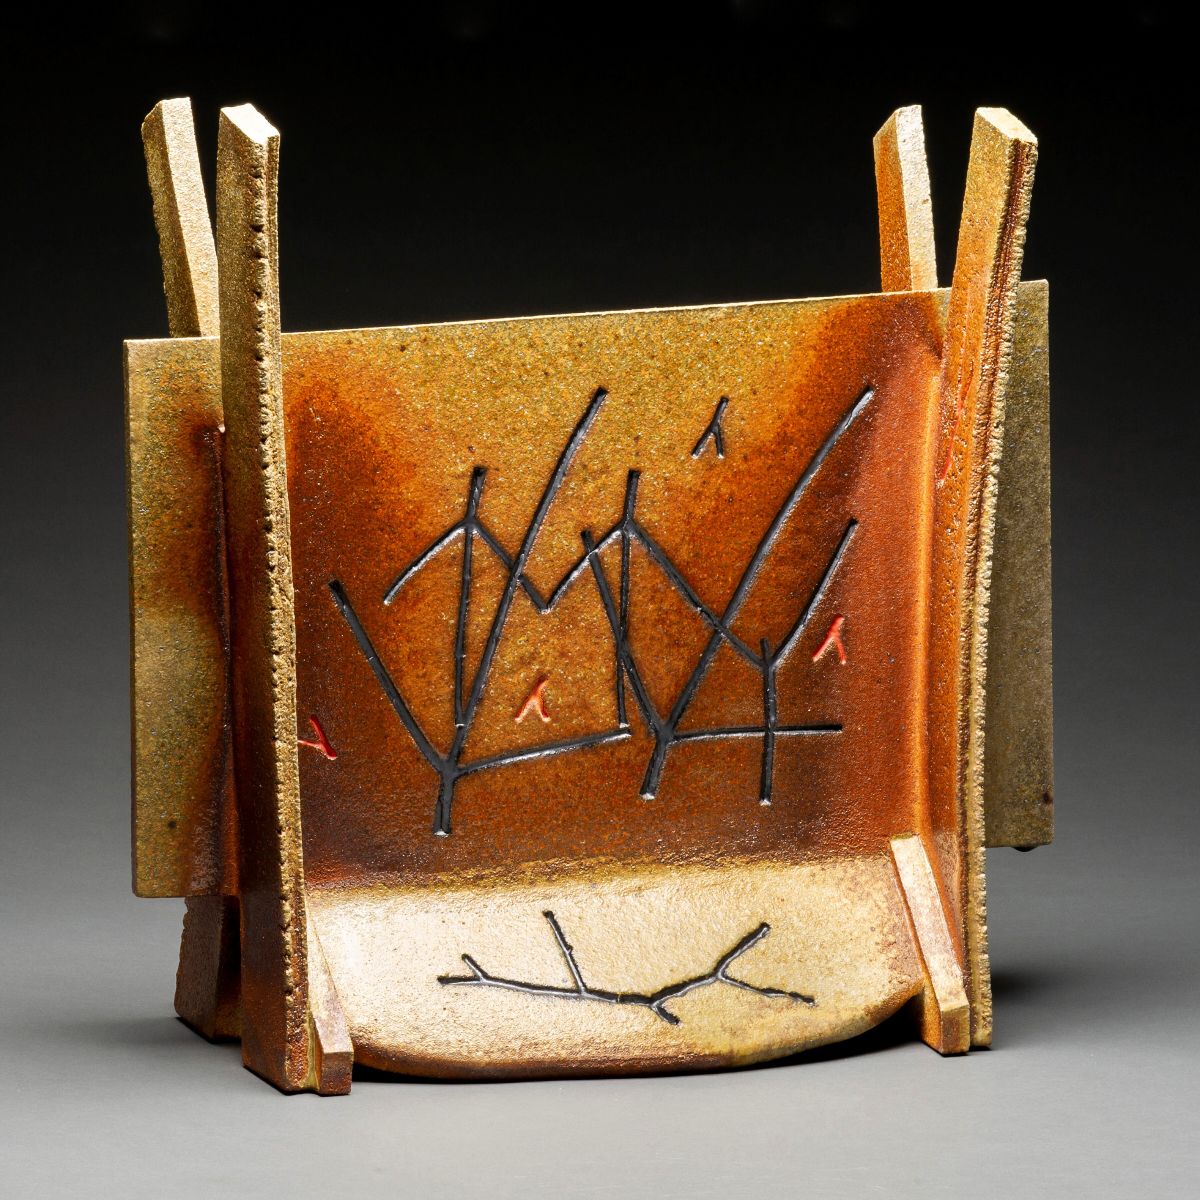 Tony Moore, All Together  2022, wood-fired ceramic, glass, 21 3/4" x 22 1/2" x 10"Photo credit Al Nowak, On Location